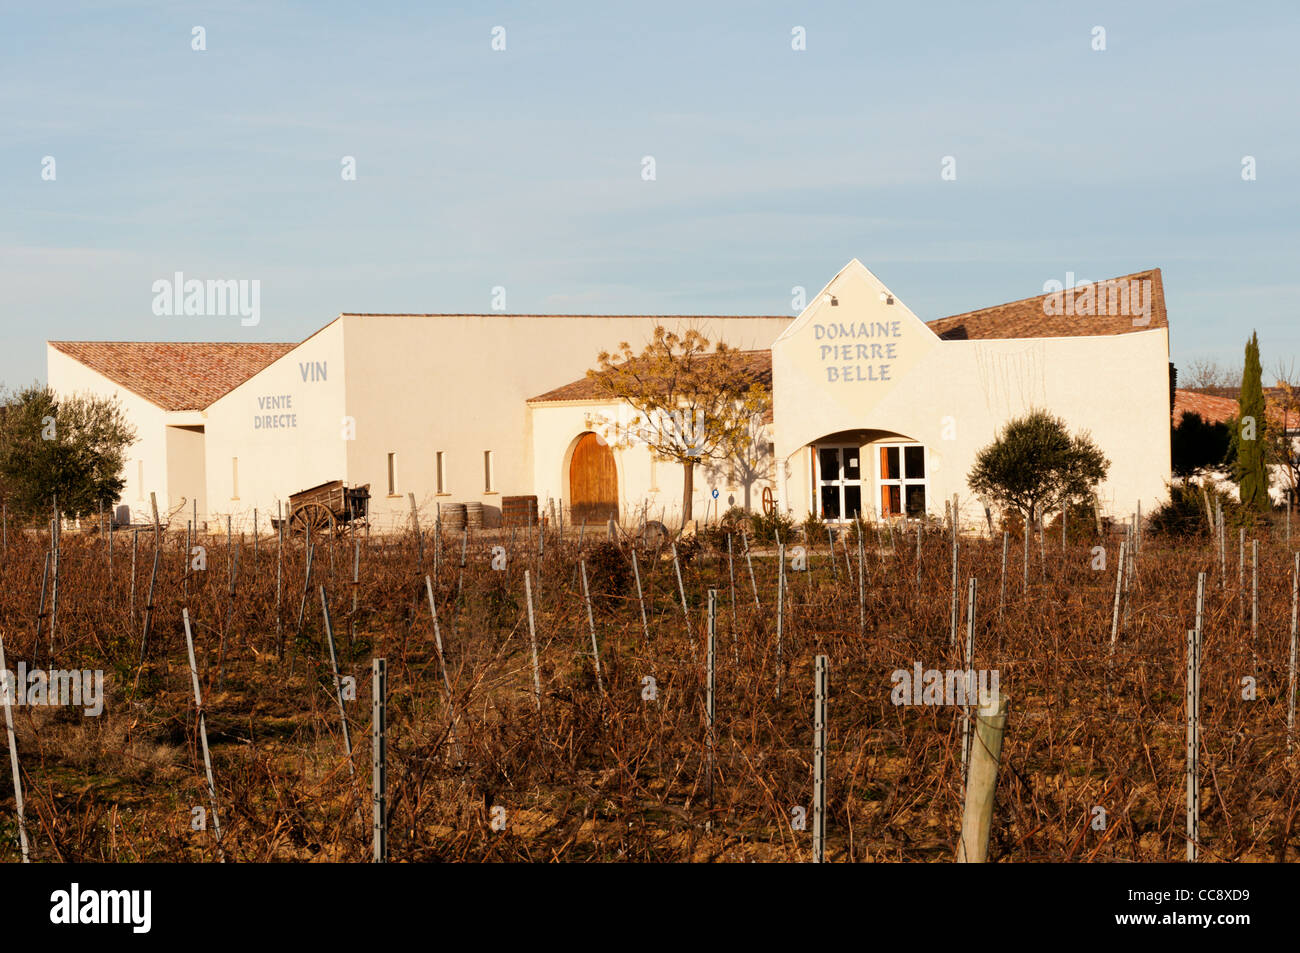 Domaine Pierre Belle wine producers near Beziers, Languedoc in the South of France. Stock Photo